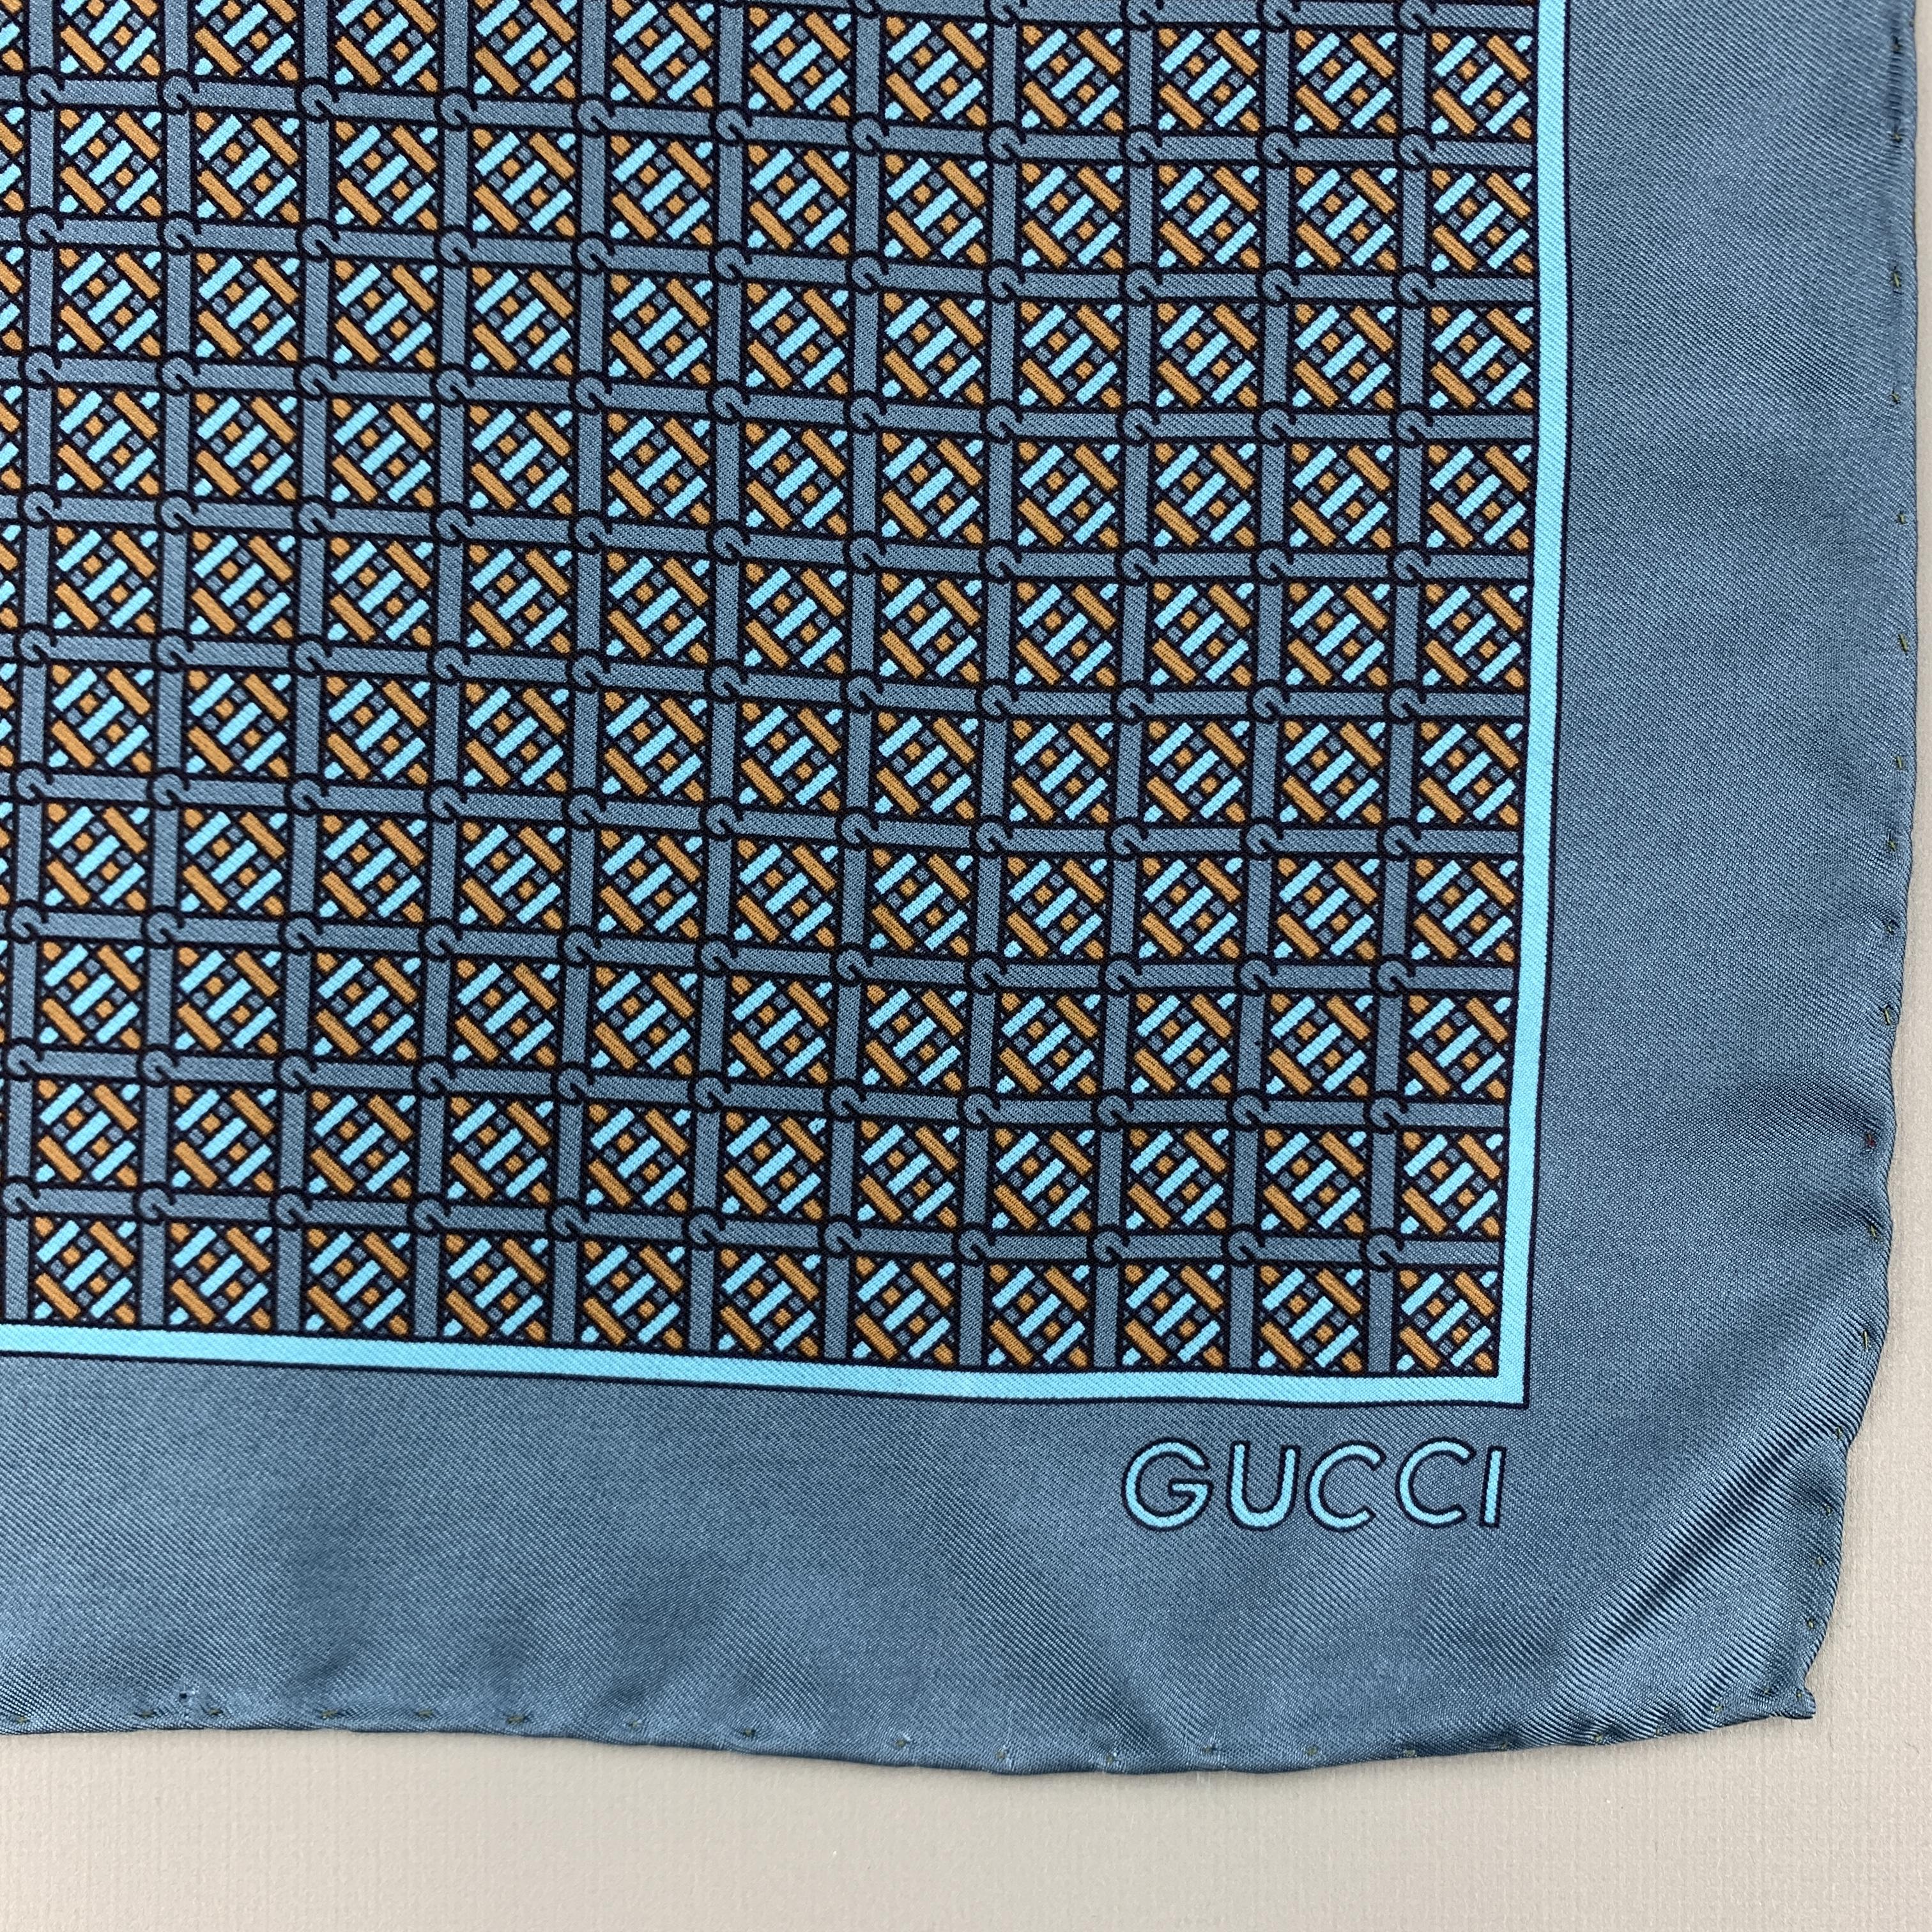 Vintage GUCCI pocket square comes in muted blue silk twill with an all over navy and taupe interlock G monogram pattern. Minor wear. As-is. Made in Italy.

Good Pre-Owned Condition.

16.25 x 16.75 in.